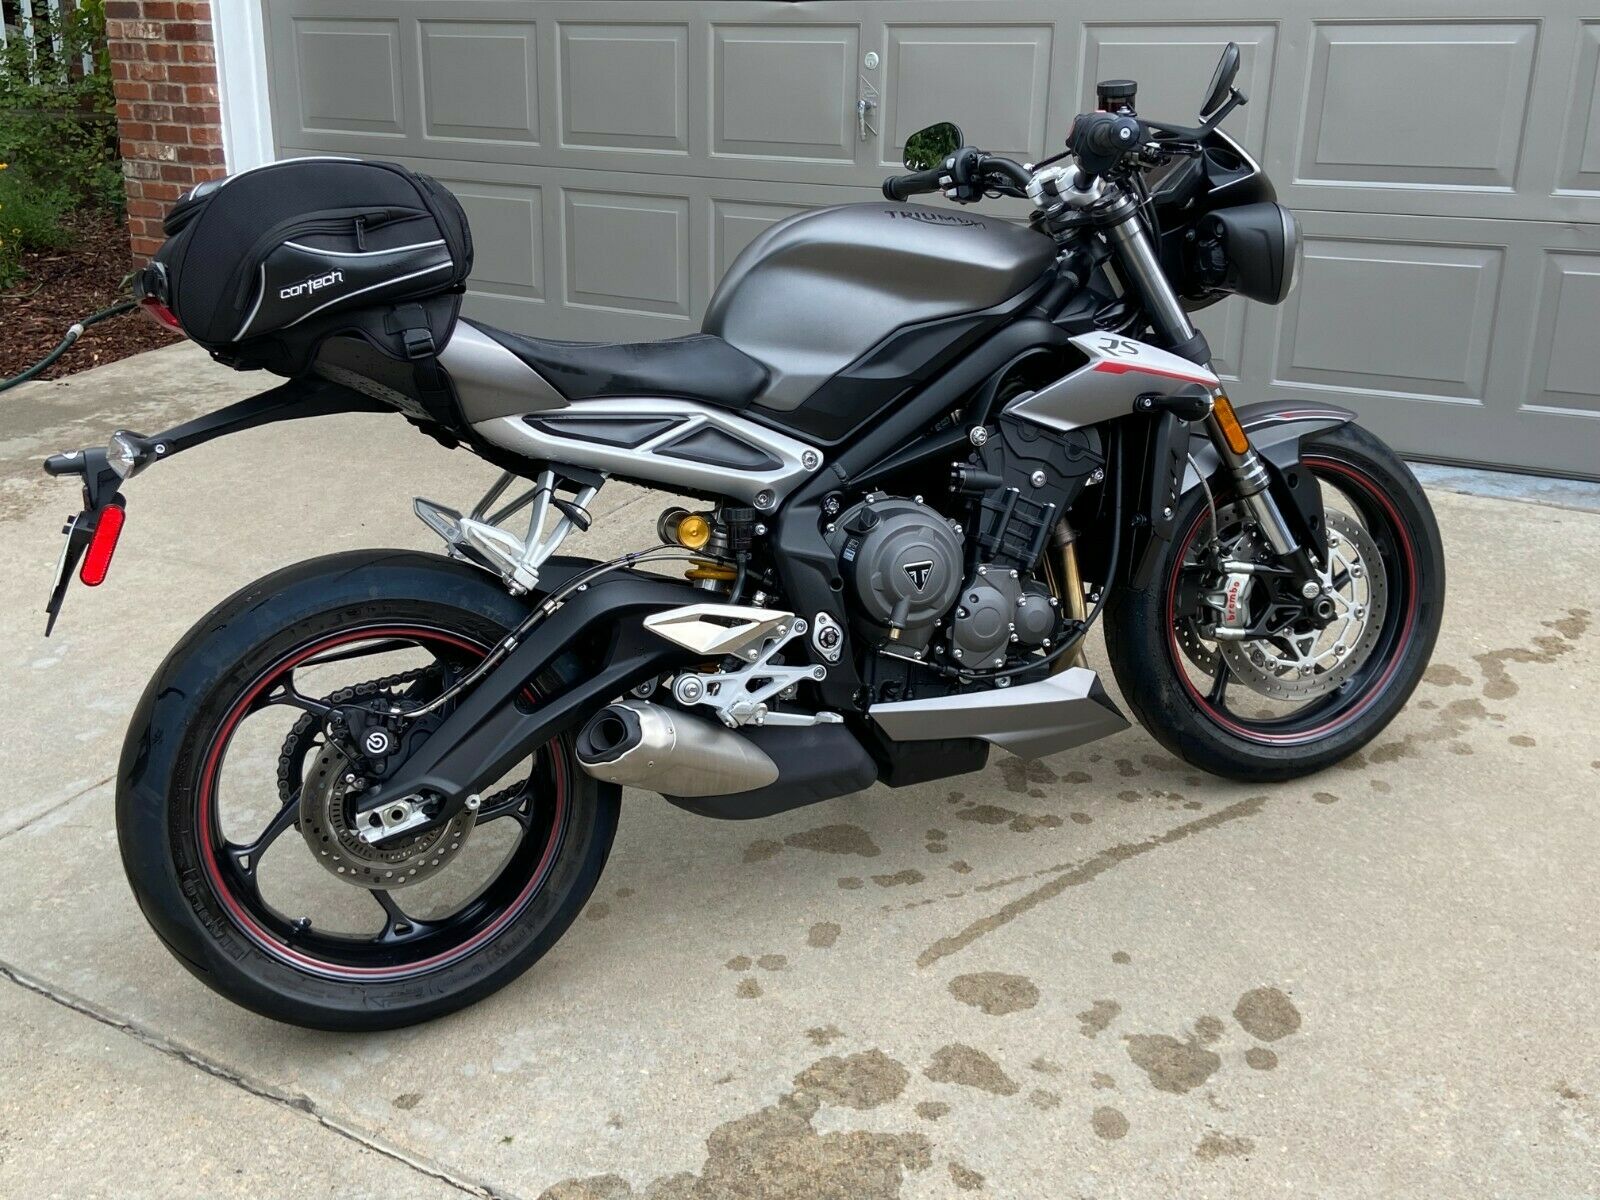 2018 Triumph Street Triple  Top Of The Line - 765rs ! Immaculate Condition - One Owner From New - 2955miles